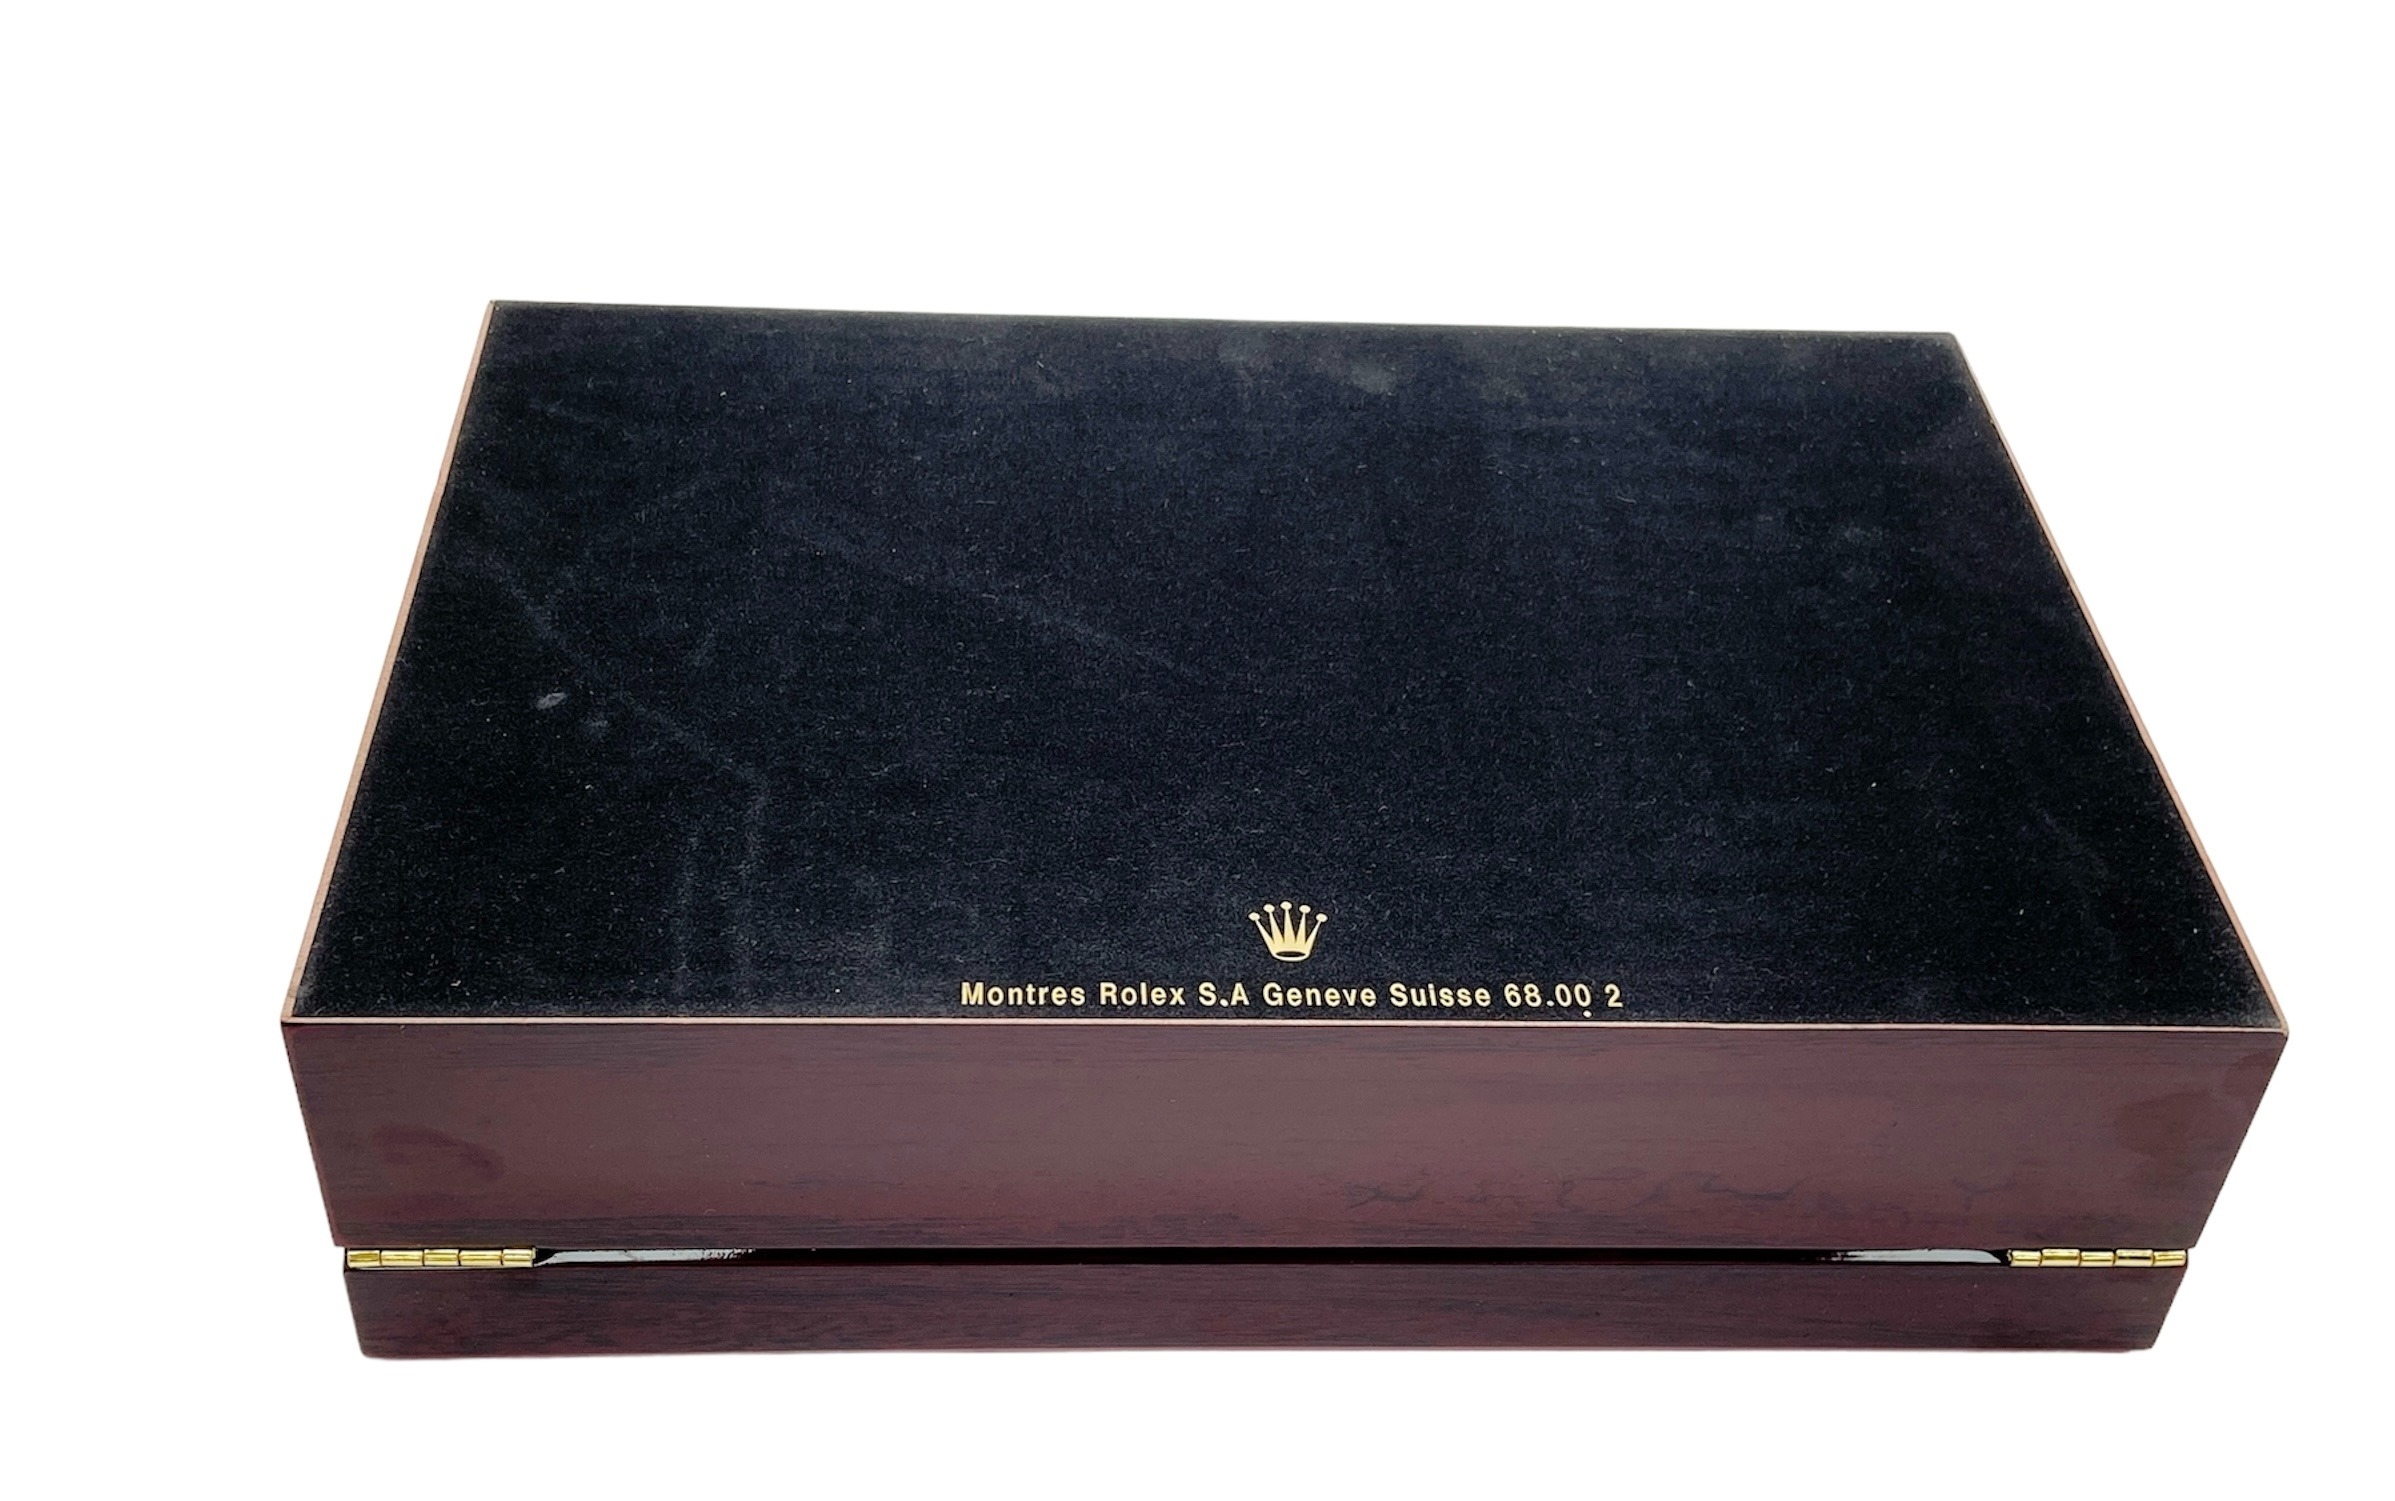 An Unused 12 Watch Display Case. Perfect for Rolex watches. 31.5 x 21.5 x 8.5cm. Rich Piano Finish. - Image 6 of 12